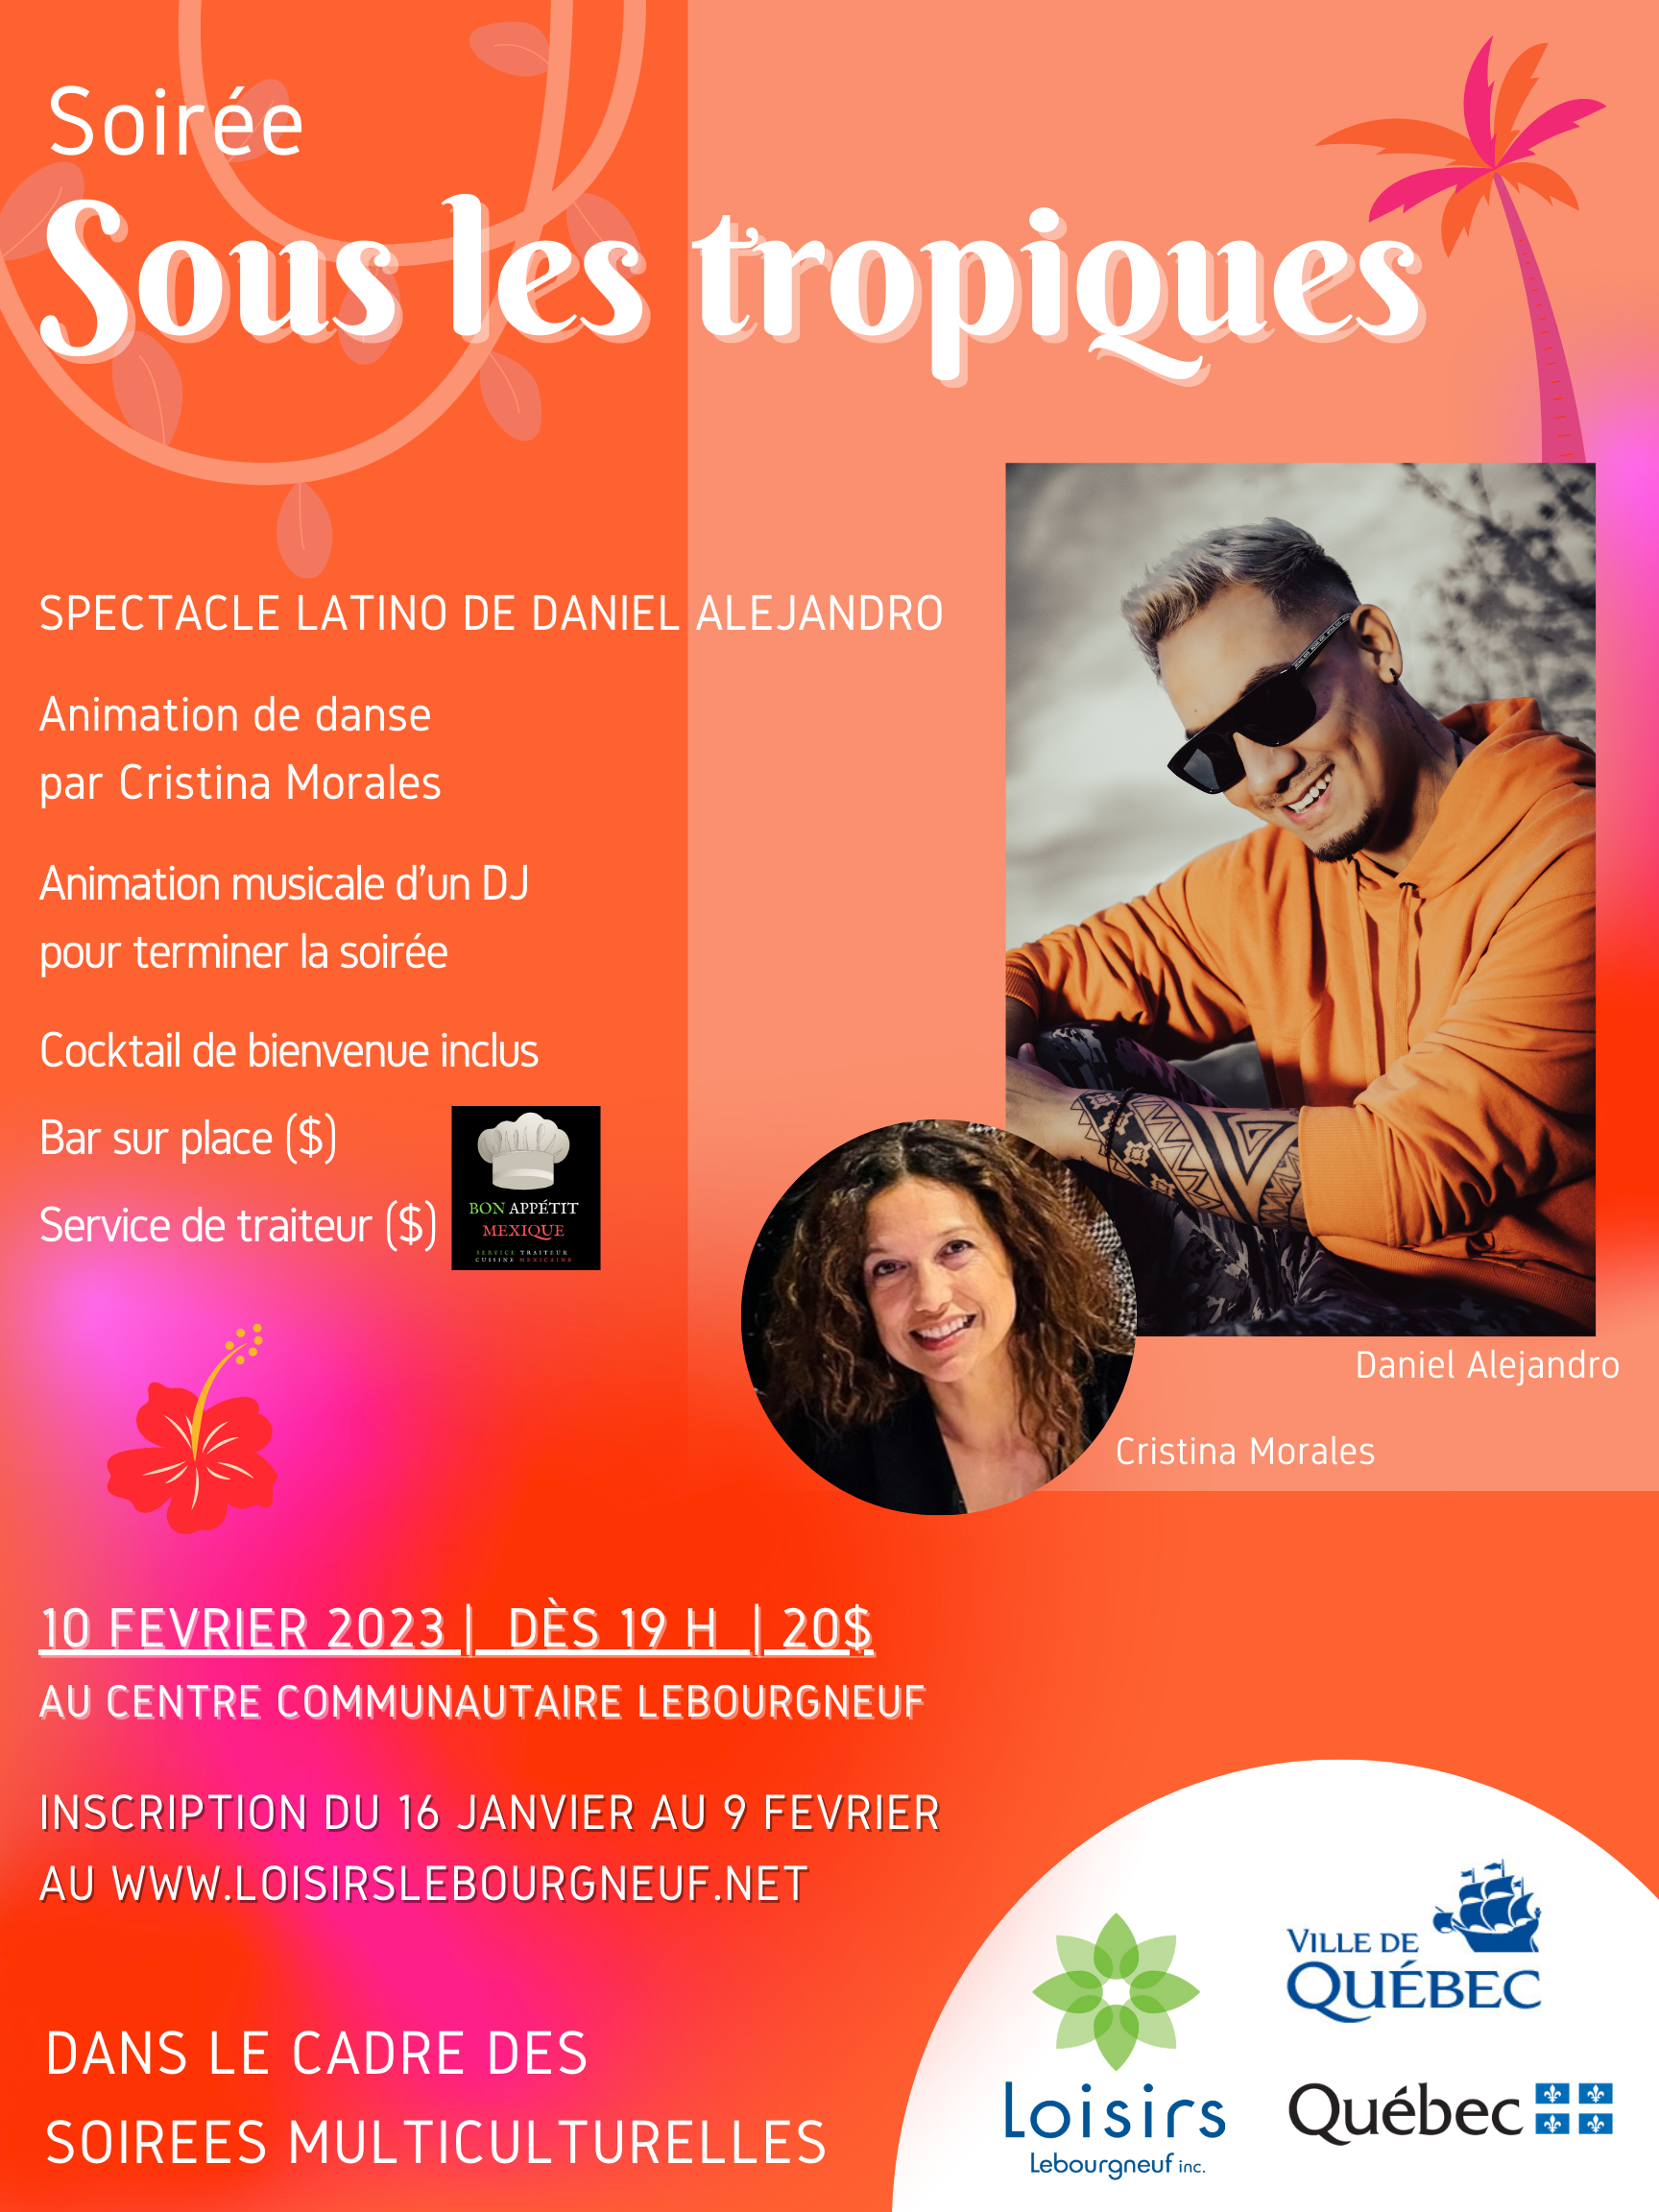 https://loisirslebourgneuf.net/wp-content/uploads/2023/01/Soiree-Latine-2023.png